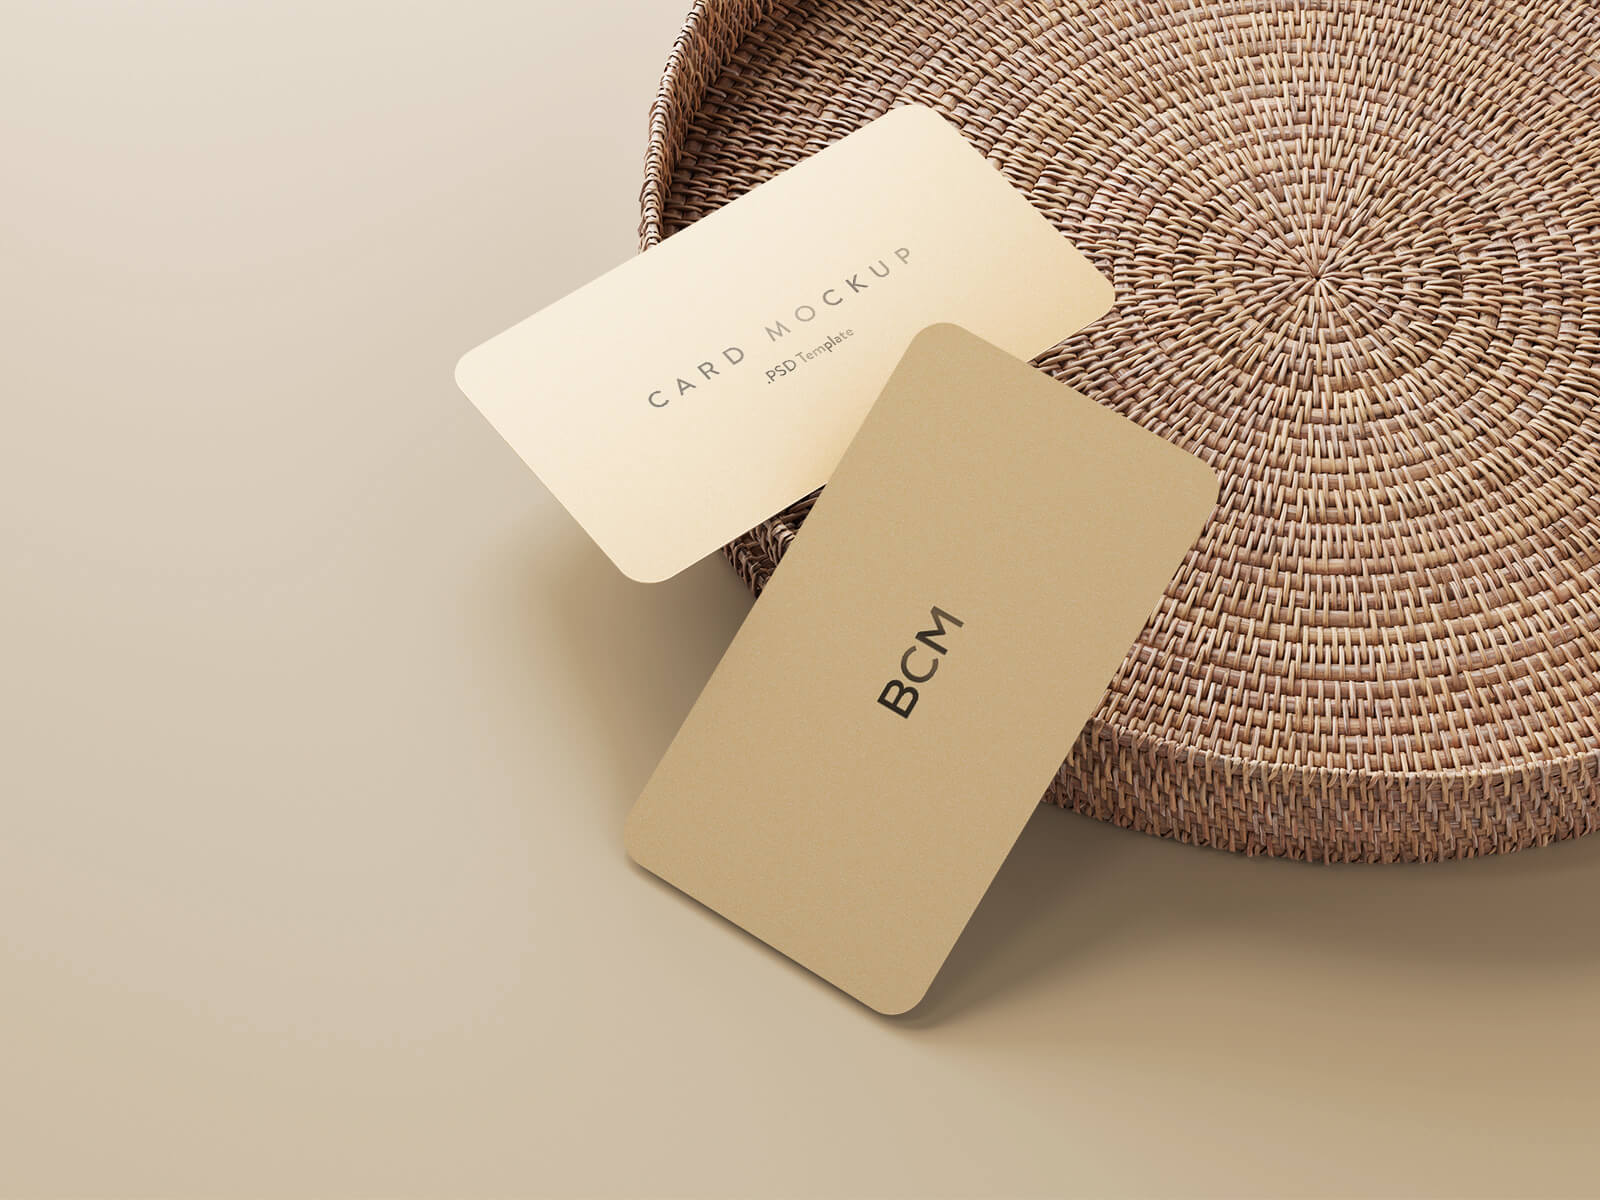 Free Rattan Tray Rounded Corner Business Card Mockup PSD Set